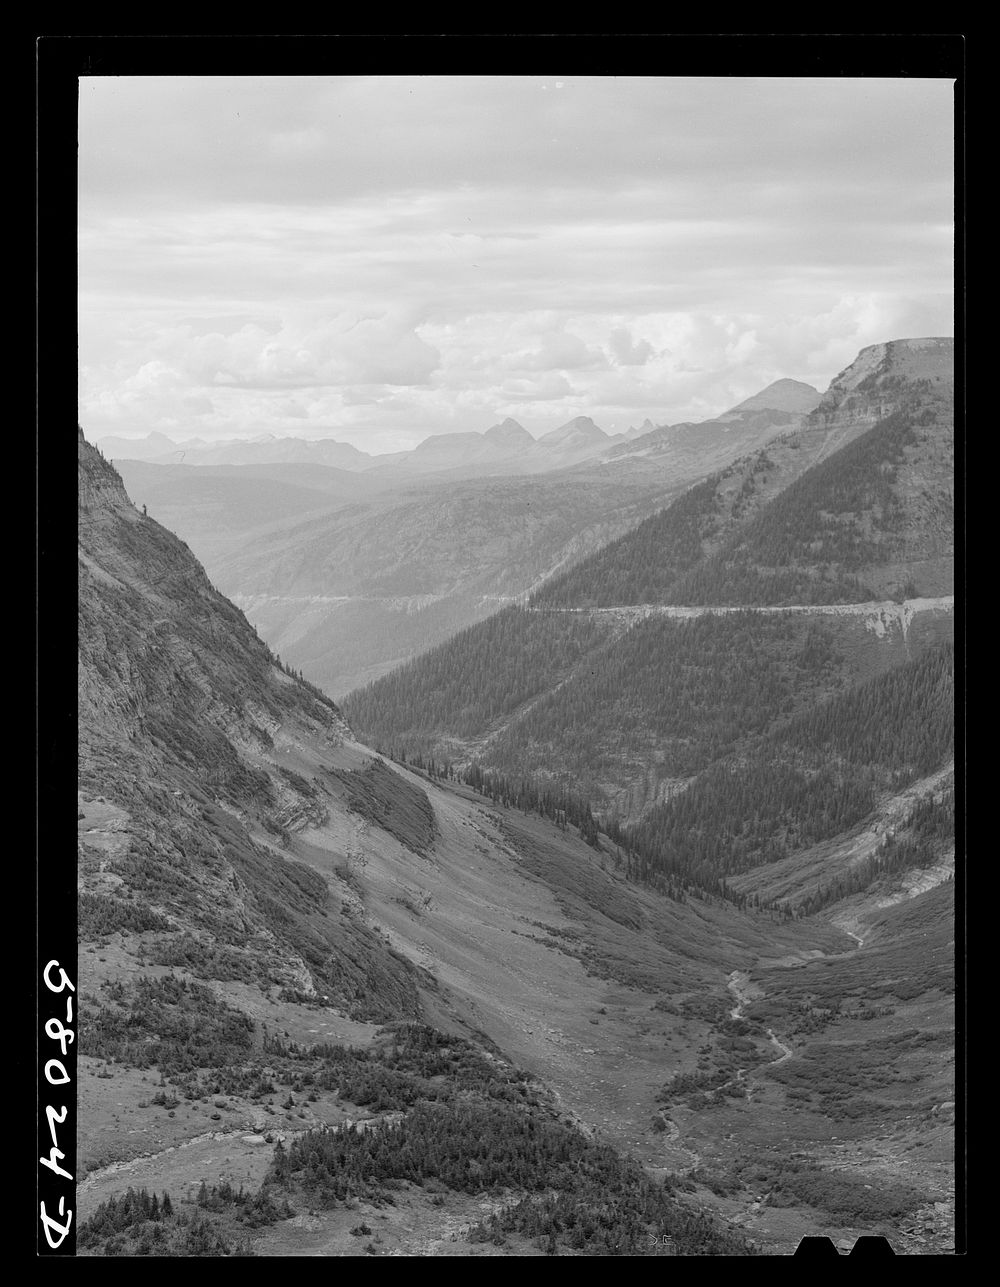 [Untitled photo, possibly related to: General view of Rocky Mountains west of Continental Divide seen from top of Logan Pass…